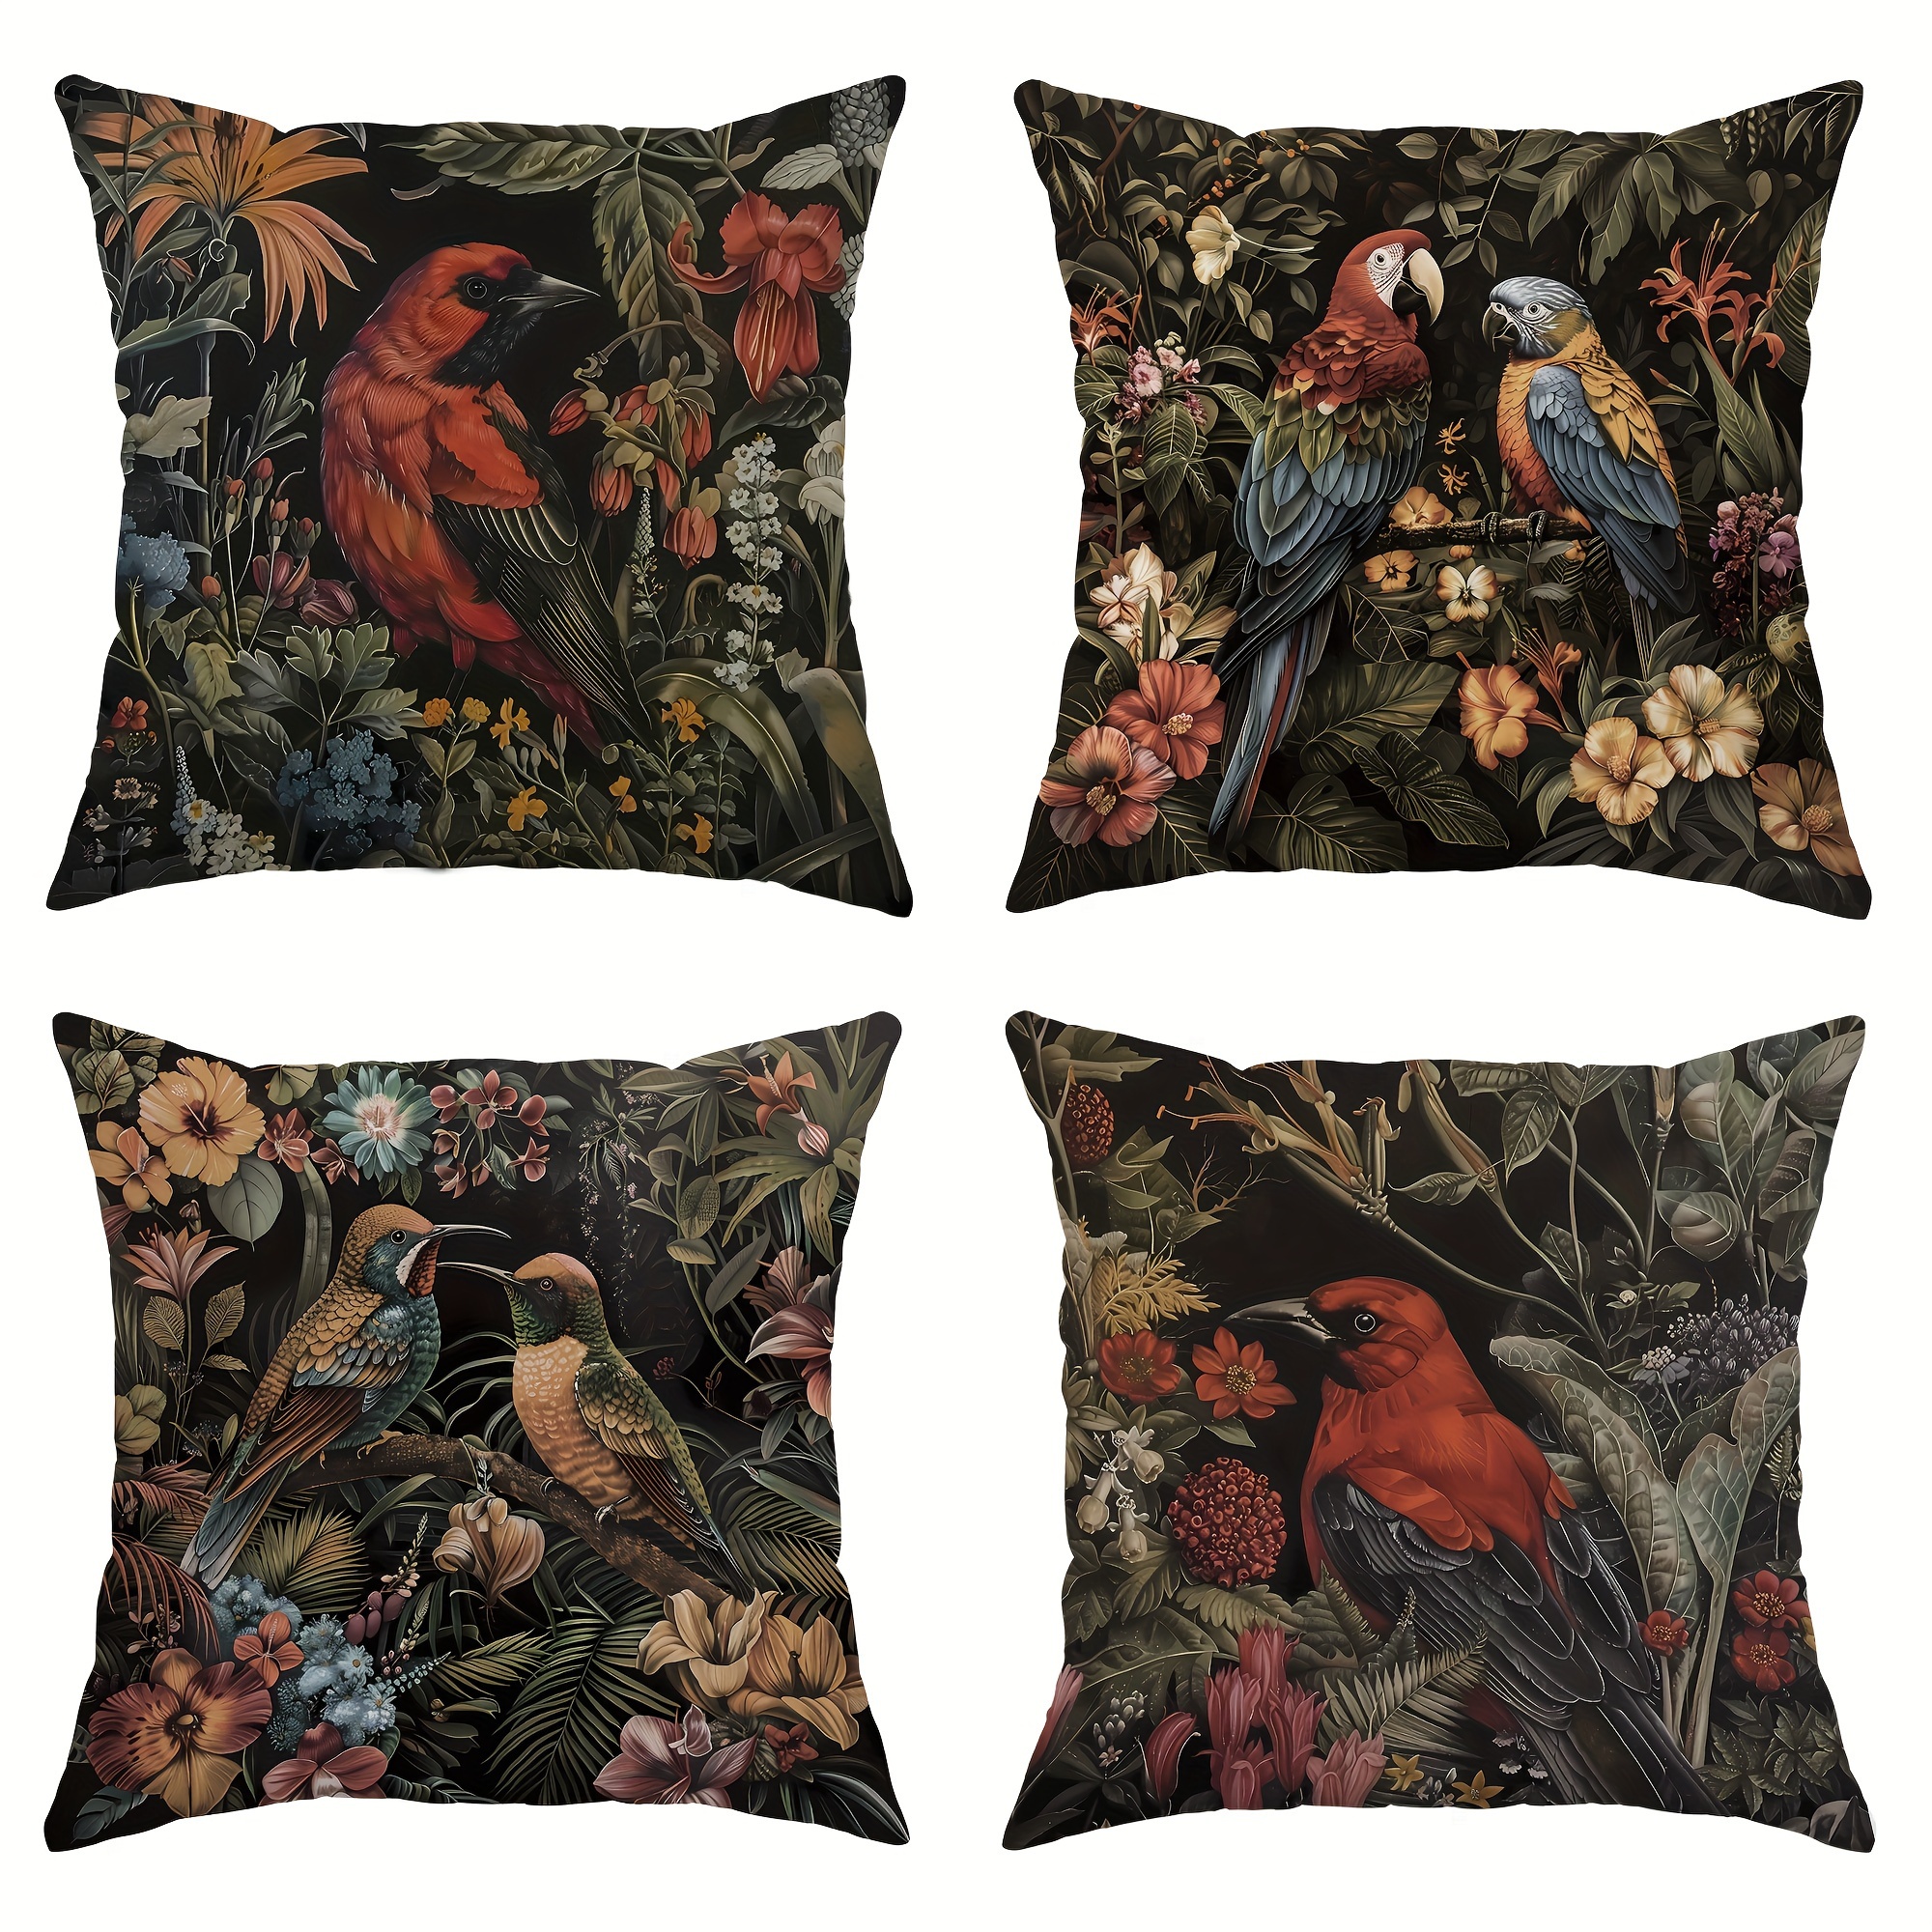 

4pcs, Velvet Throw Pillow Covers Tropical Plant Parrot Black Forest Green Decorative Pillow Covers 18*18 Inch Suitable For Summer And Autumn Living Room Bedroom Sofa Bed Decoration